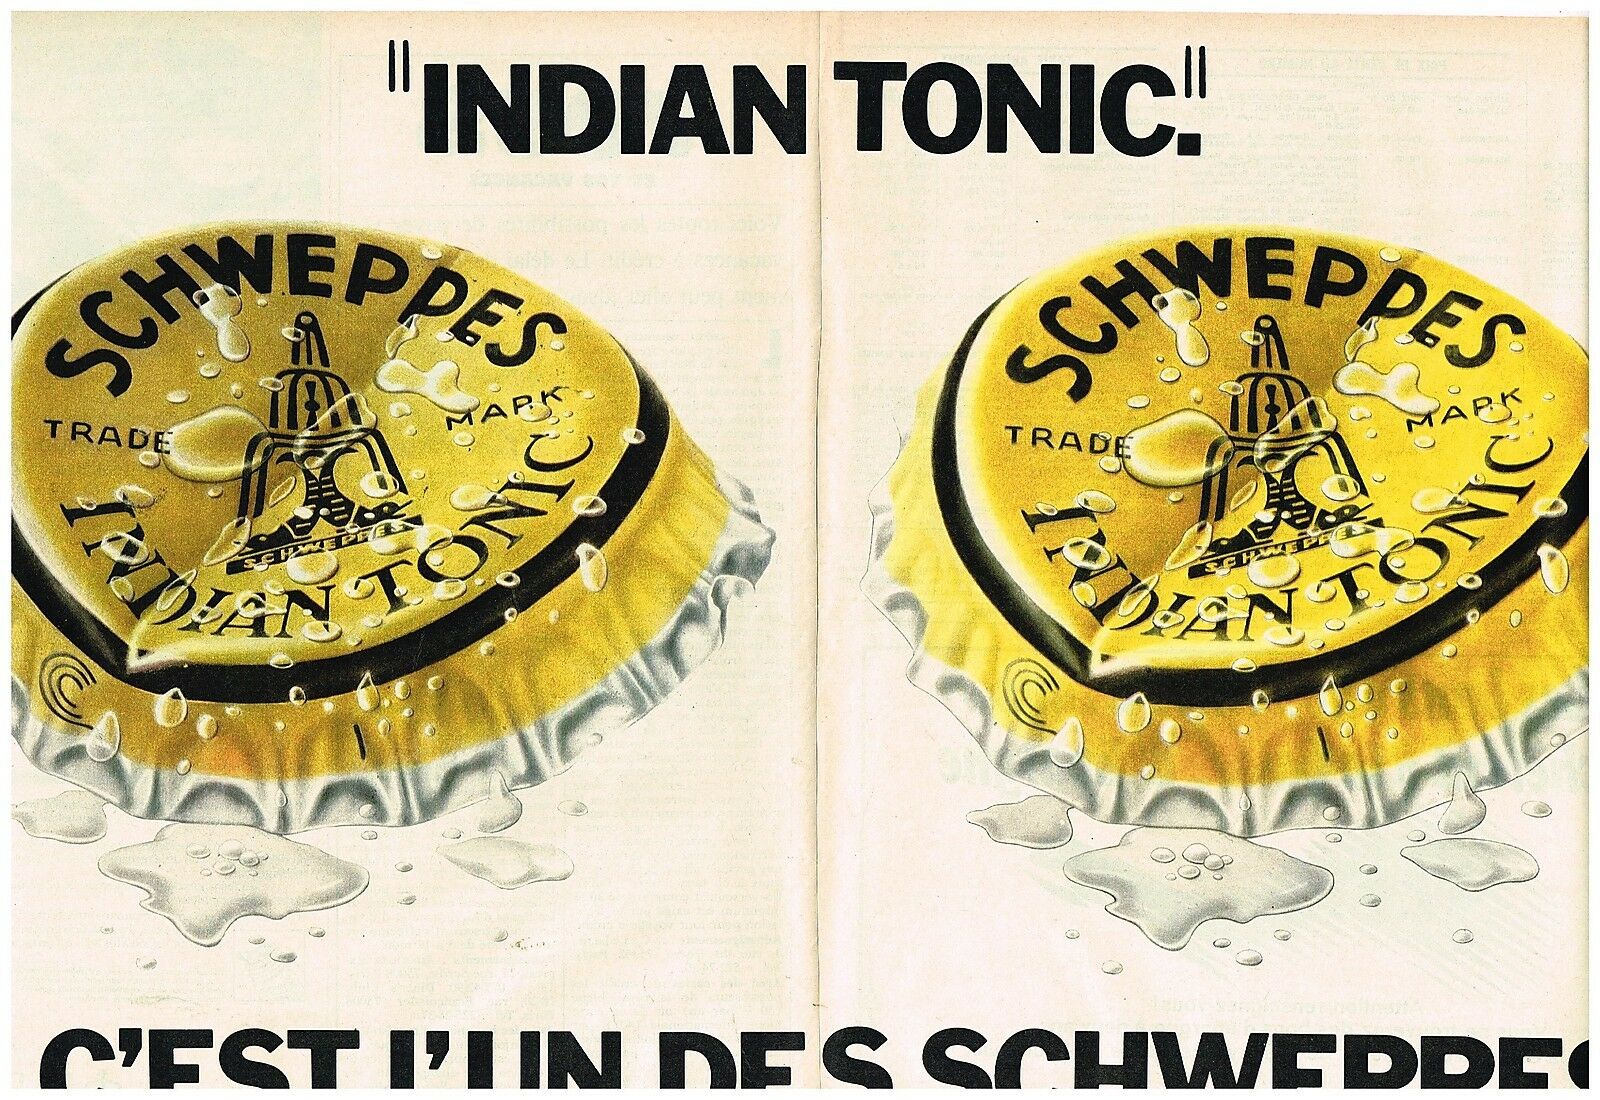 1974 Schweppes Indian Tonic